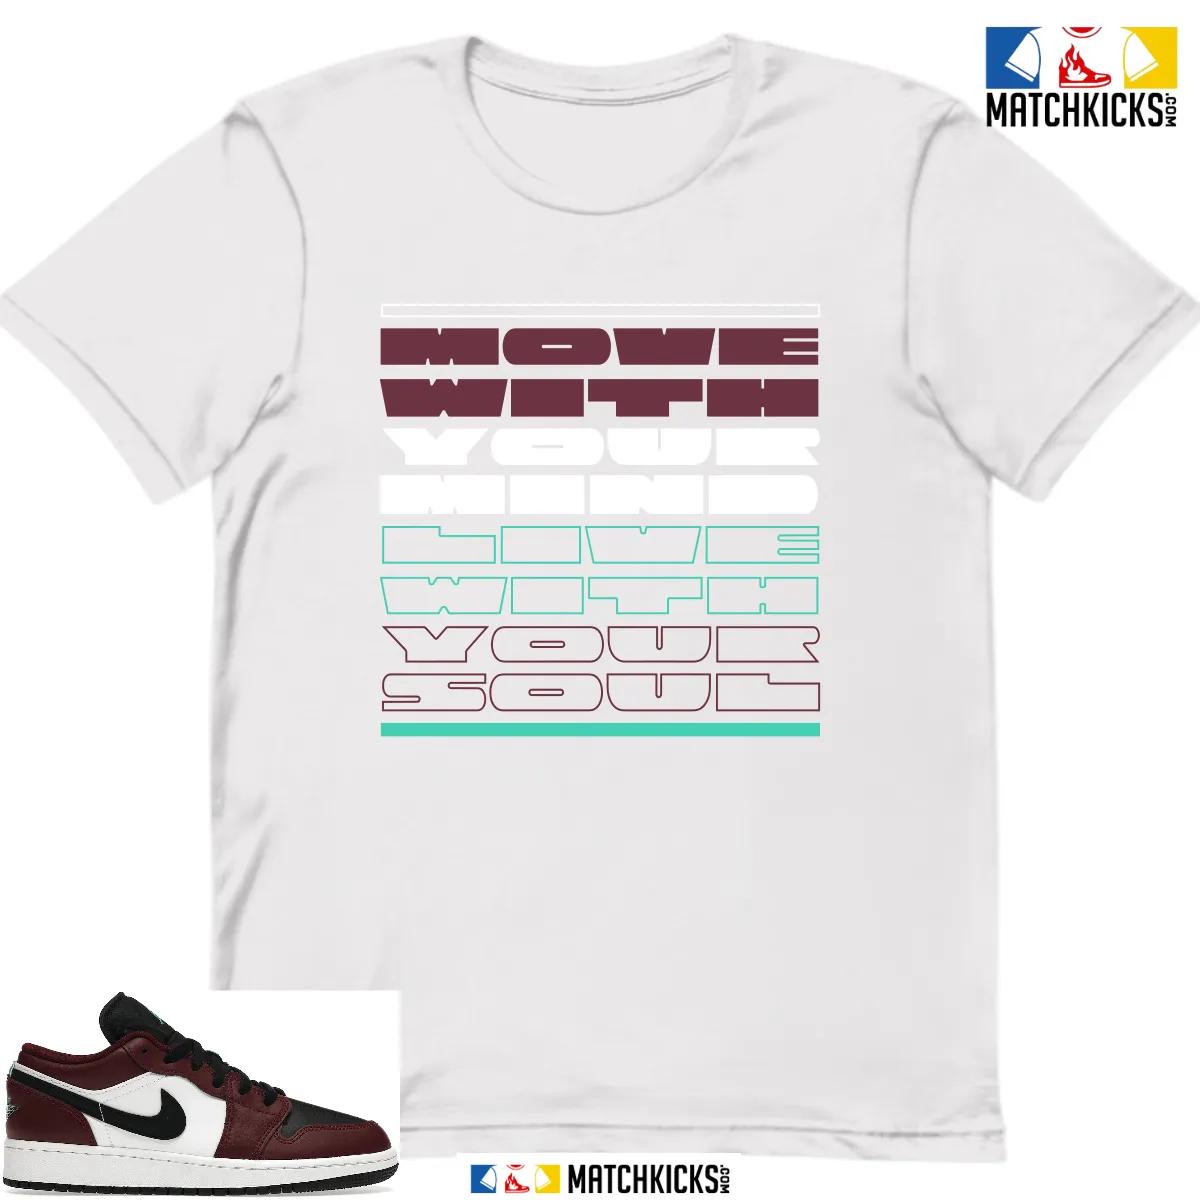 Custom Match - White T-Shirt - Jordan 1 Low SE Dark Beetroot Roma Green (GS) - Move With Your Mind Live With Your Soul